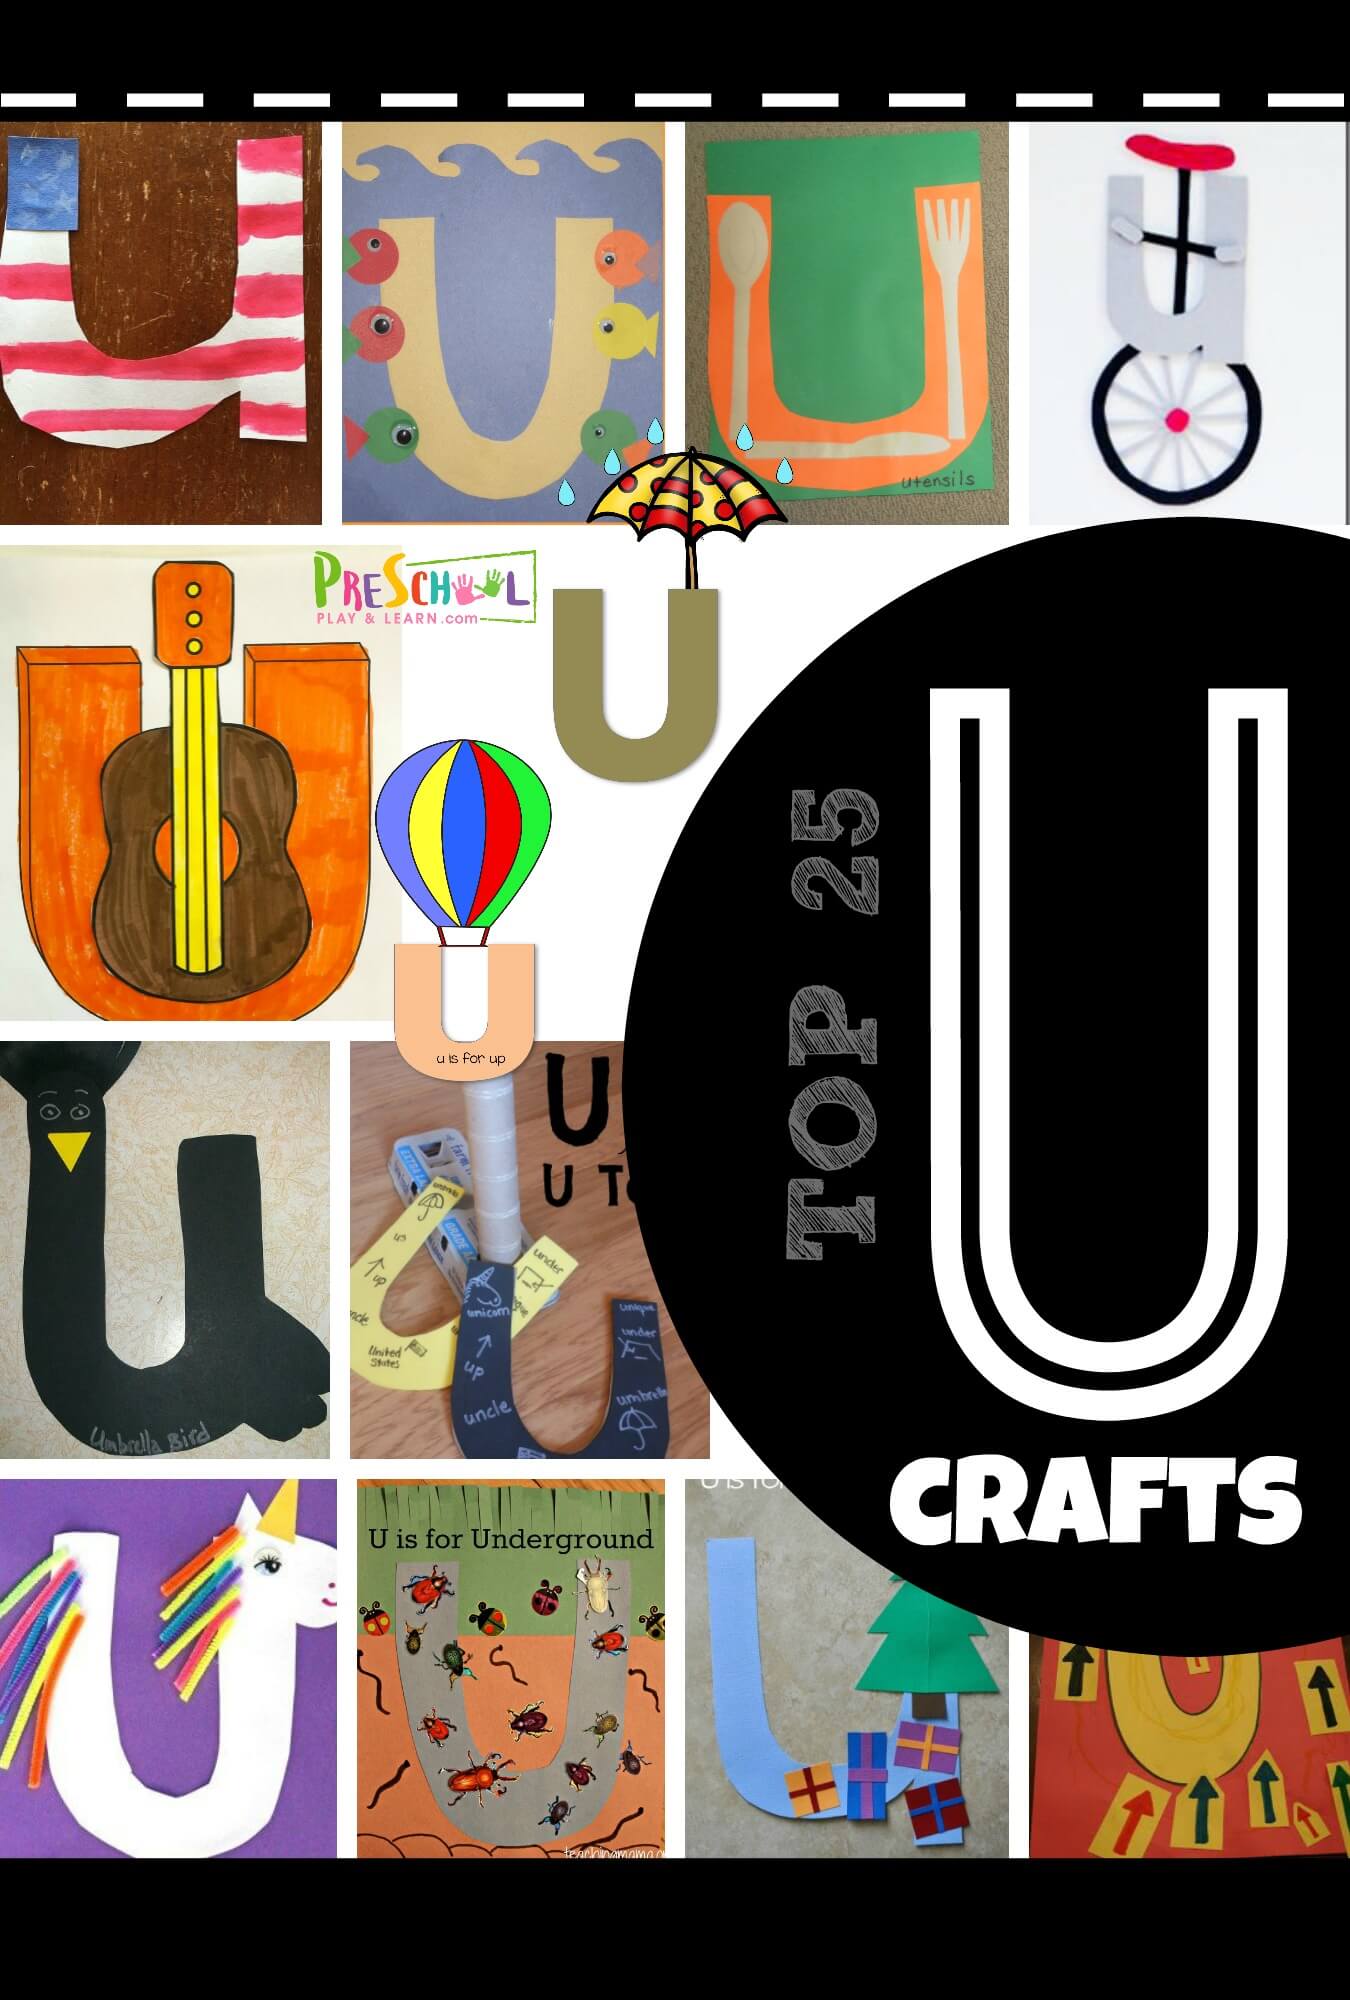 u is for under